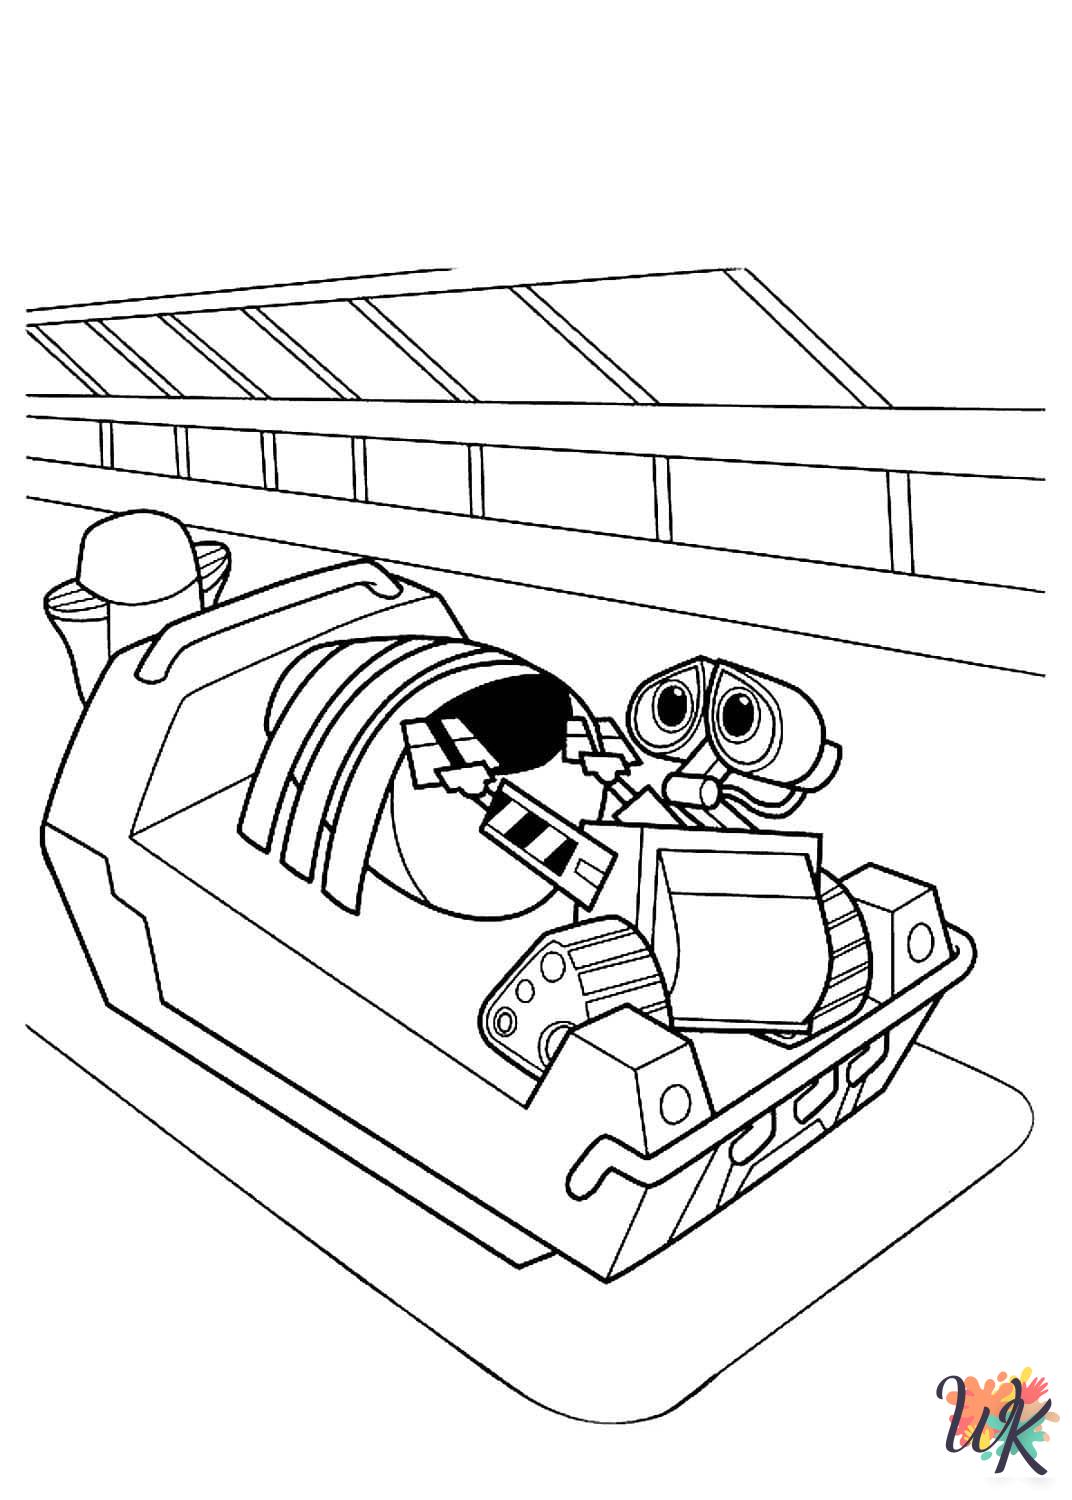 WALL-E free coloring pages